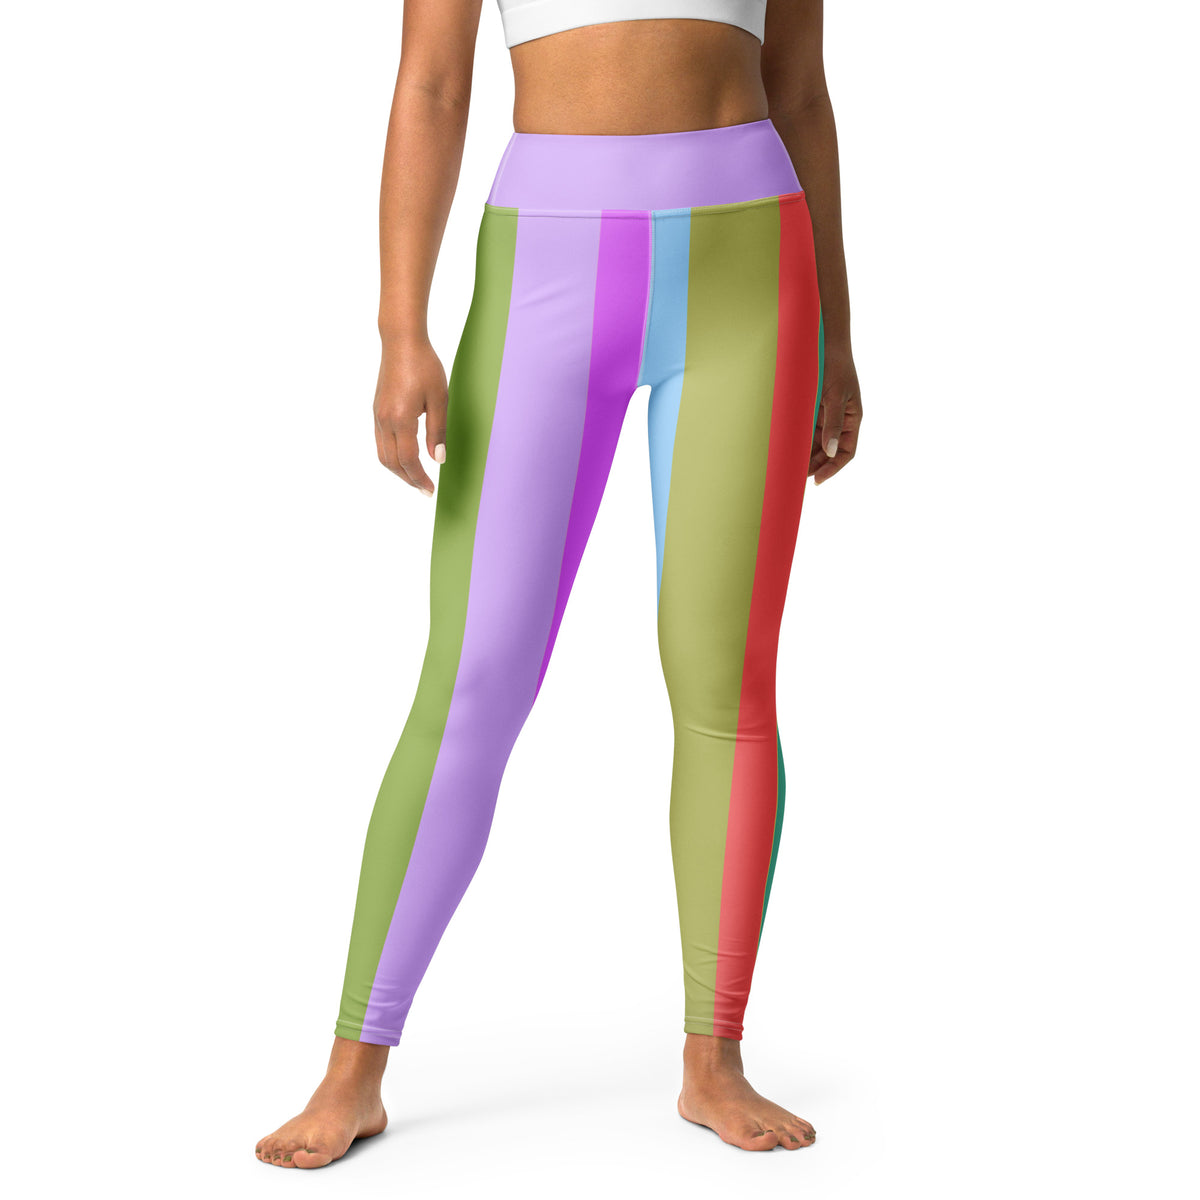 Galactic Stratosphere Yoga Leggings with cosmic design for fitness enthusiasts.